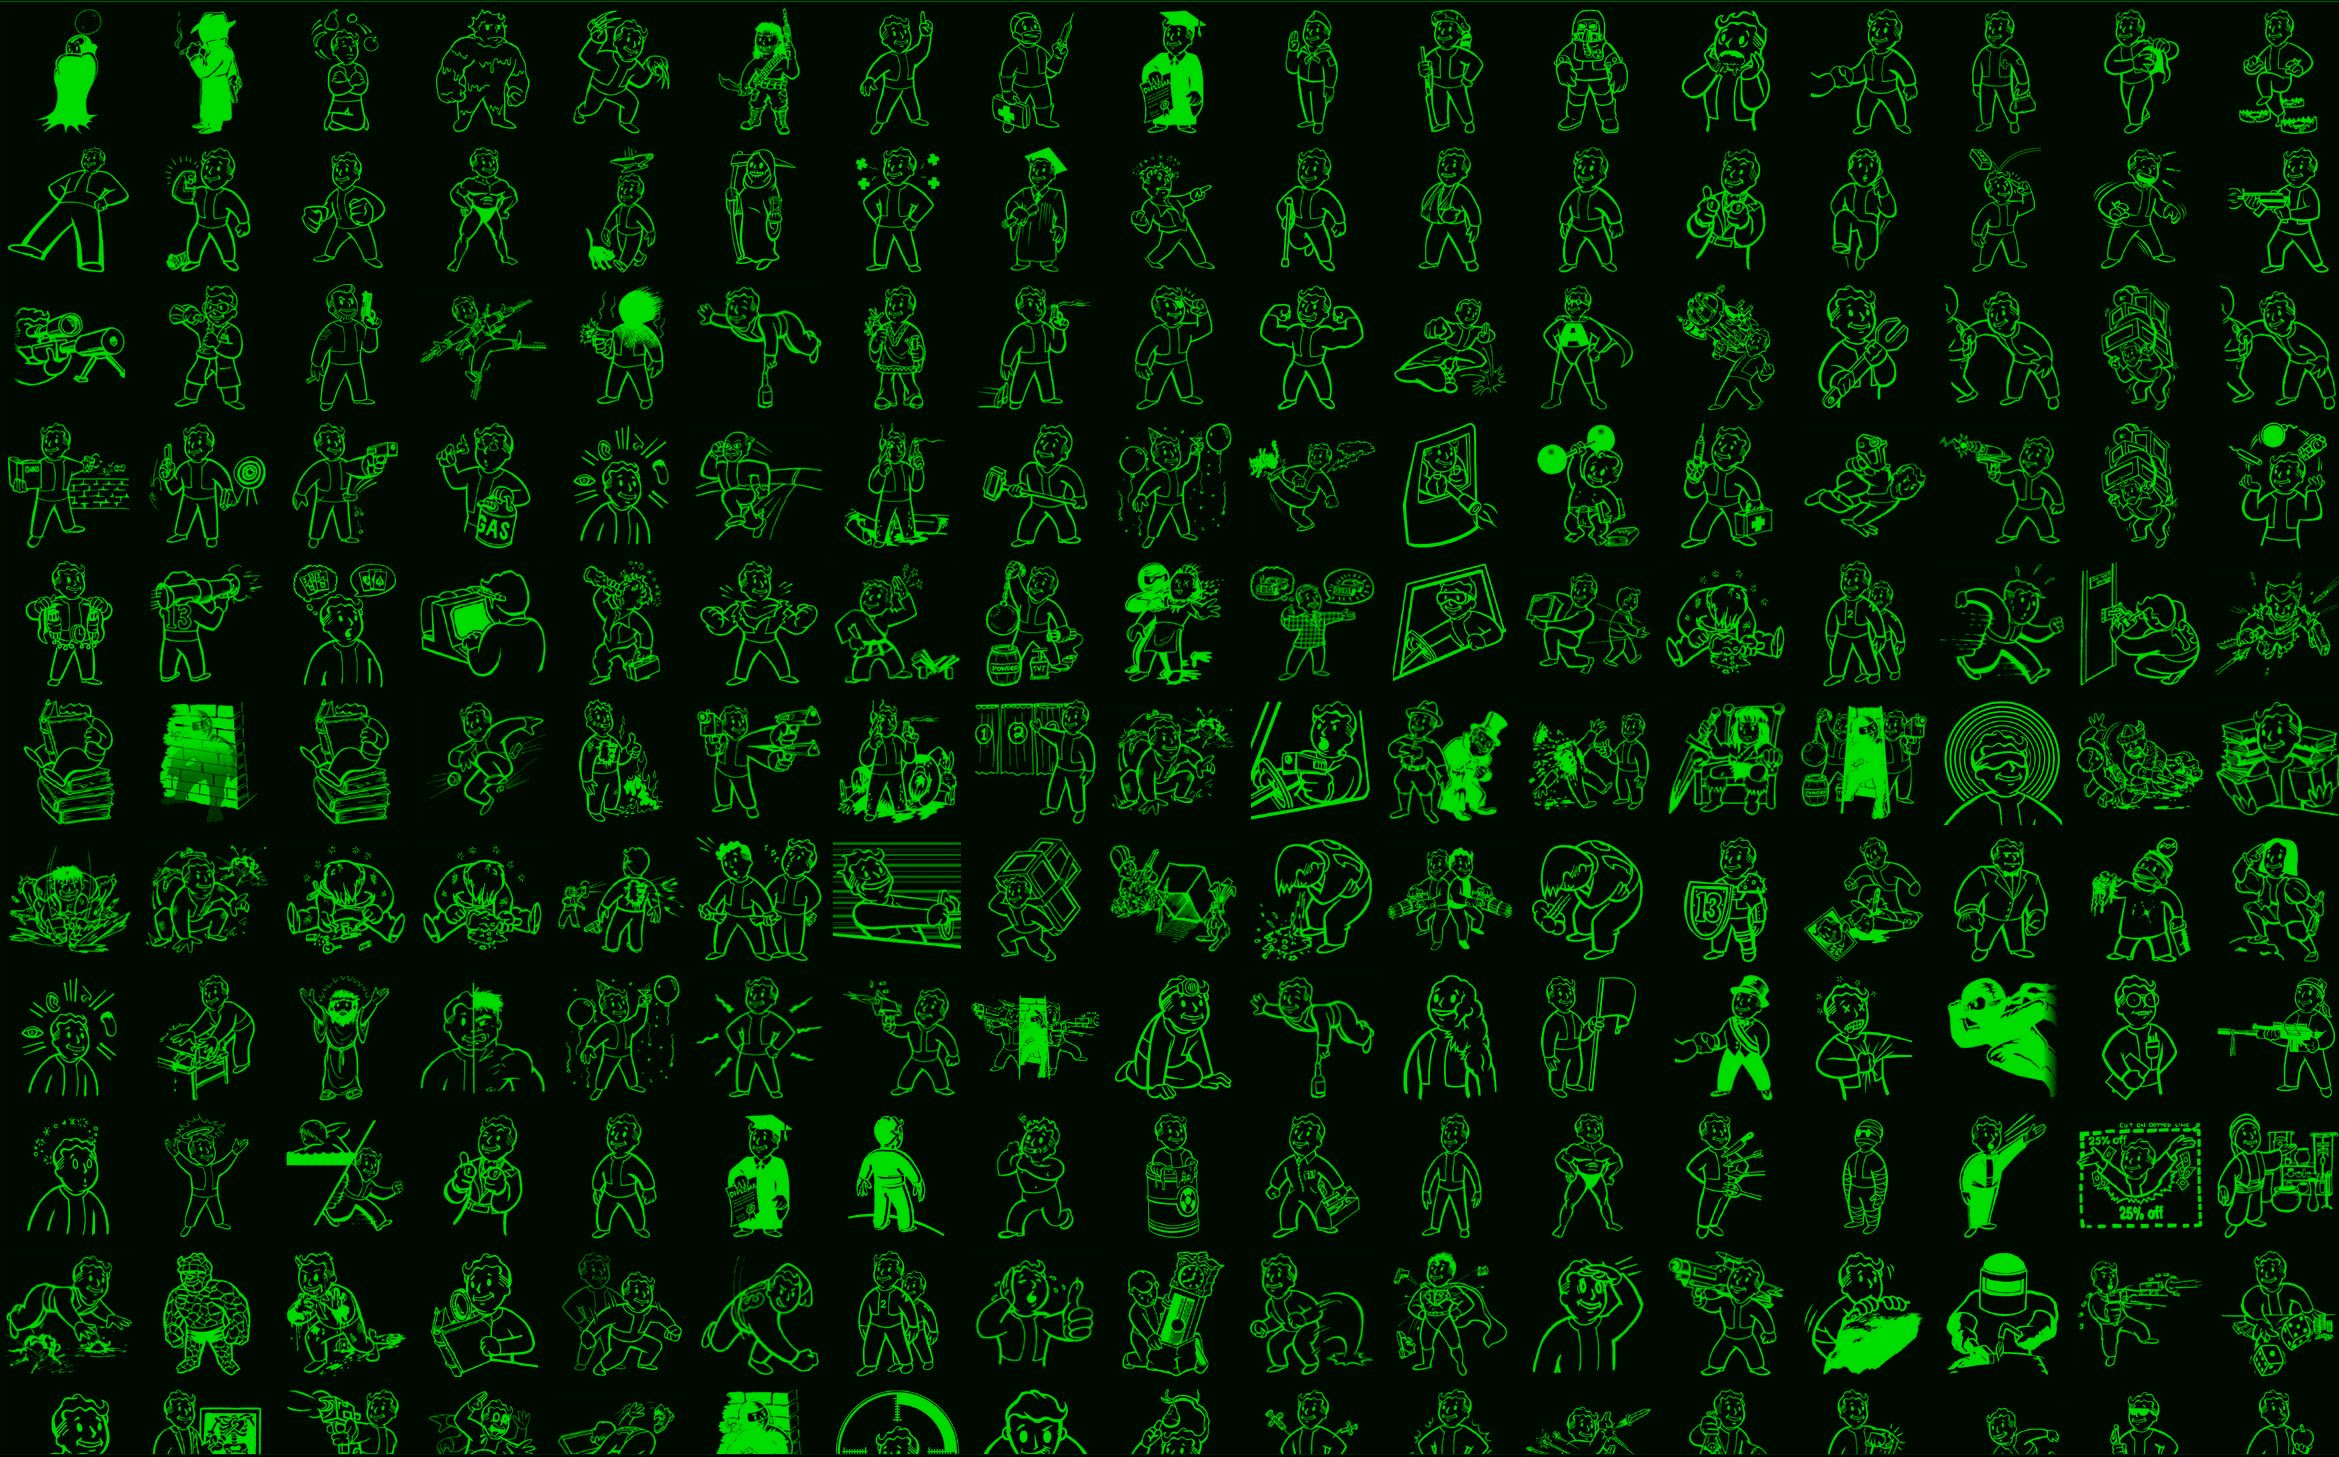 Free Download Fallout Wallpaper 2339x1457 Fallout 2339x1457 For Your Desktop Mobile Tablet Explore 48 Fallout Pip Boy Wallpaper Fallout 4 Vault Boy Wallpaper Pip Boy Iphone Wallpaper Fallout Pipboy Wallpaper For Pc